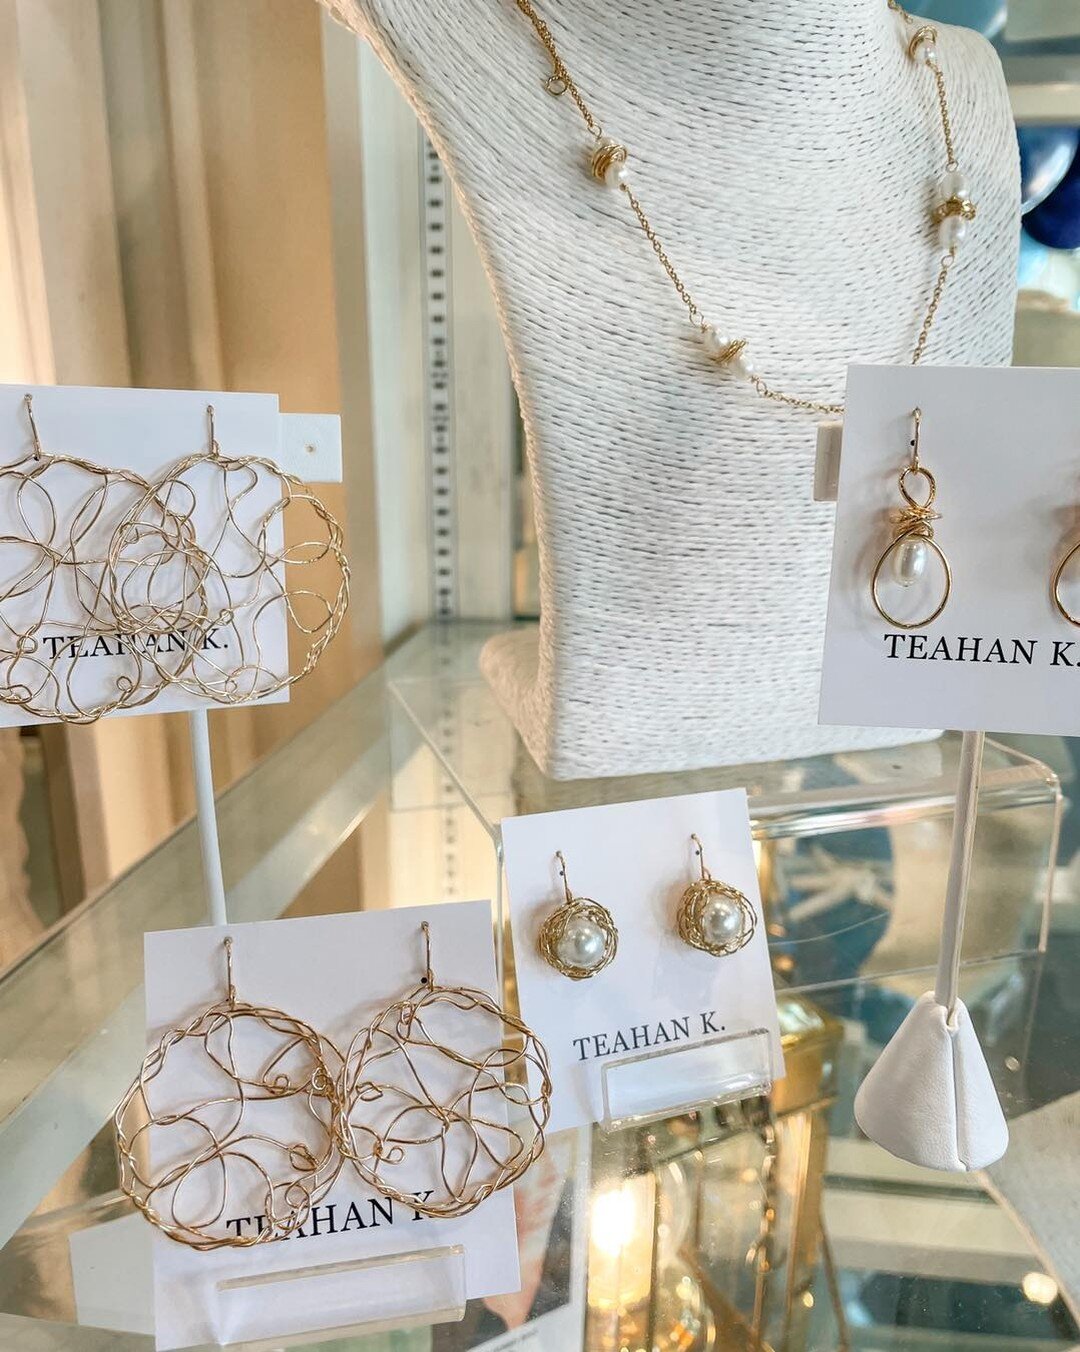 On the 11th day of HH Christmas - Teahan K. Jewelry. Timeless, elegant, and feminine🤍🤍 📍Handmade in Rhode Island